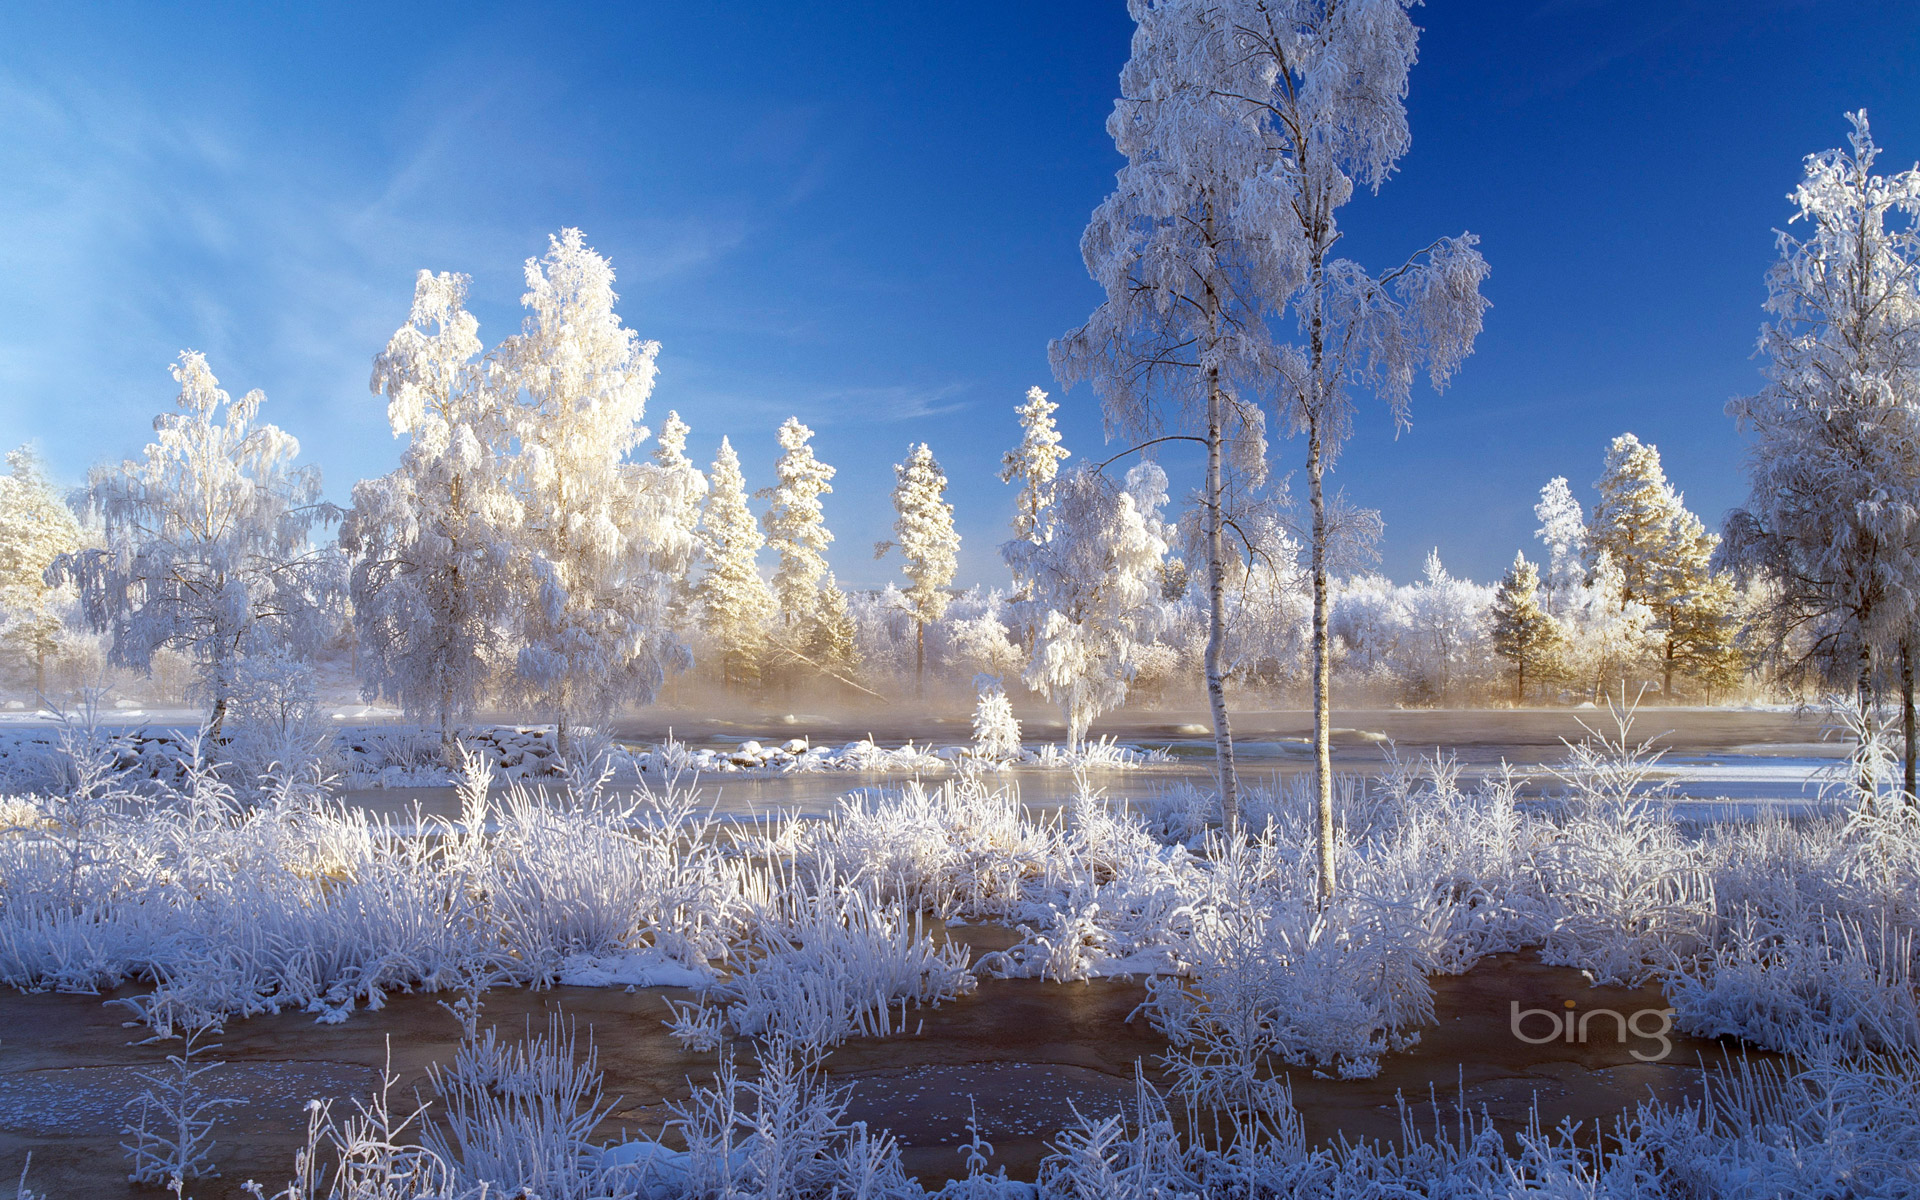 Weekly Bing wallpapers 25 to 31 December 2012   HQ Wallpapers   HQ